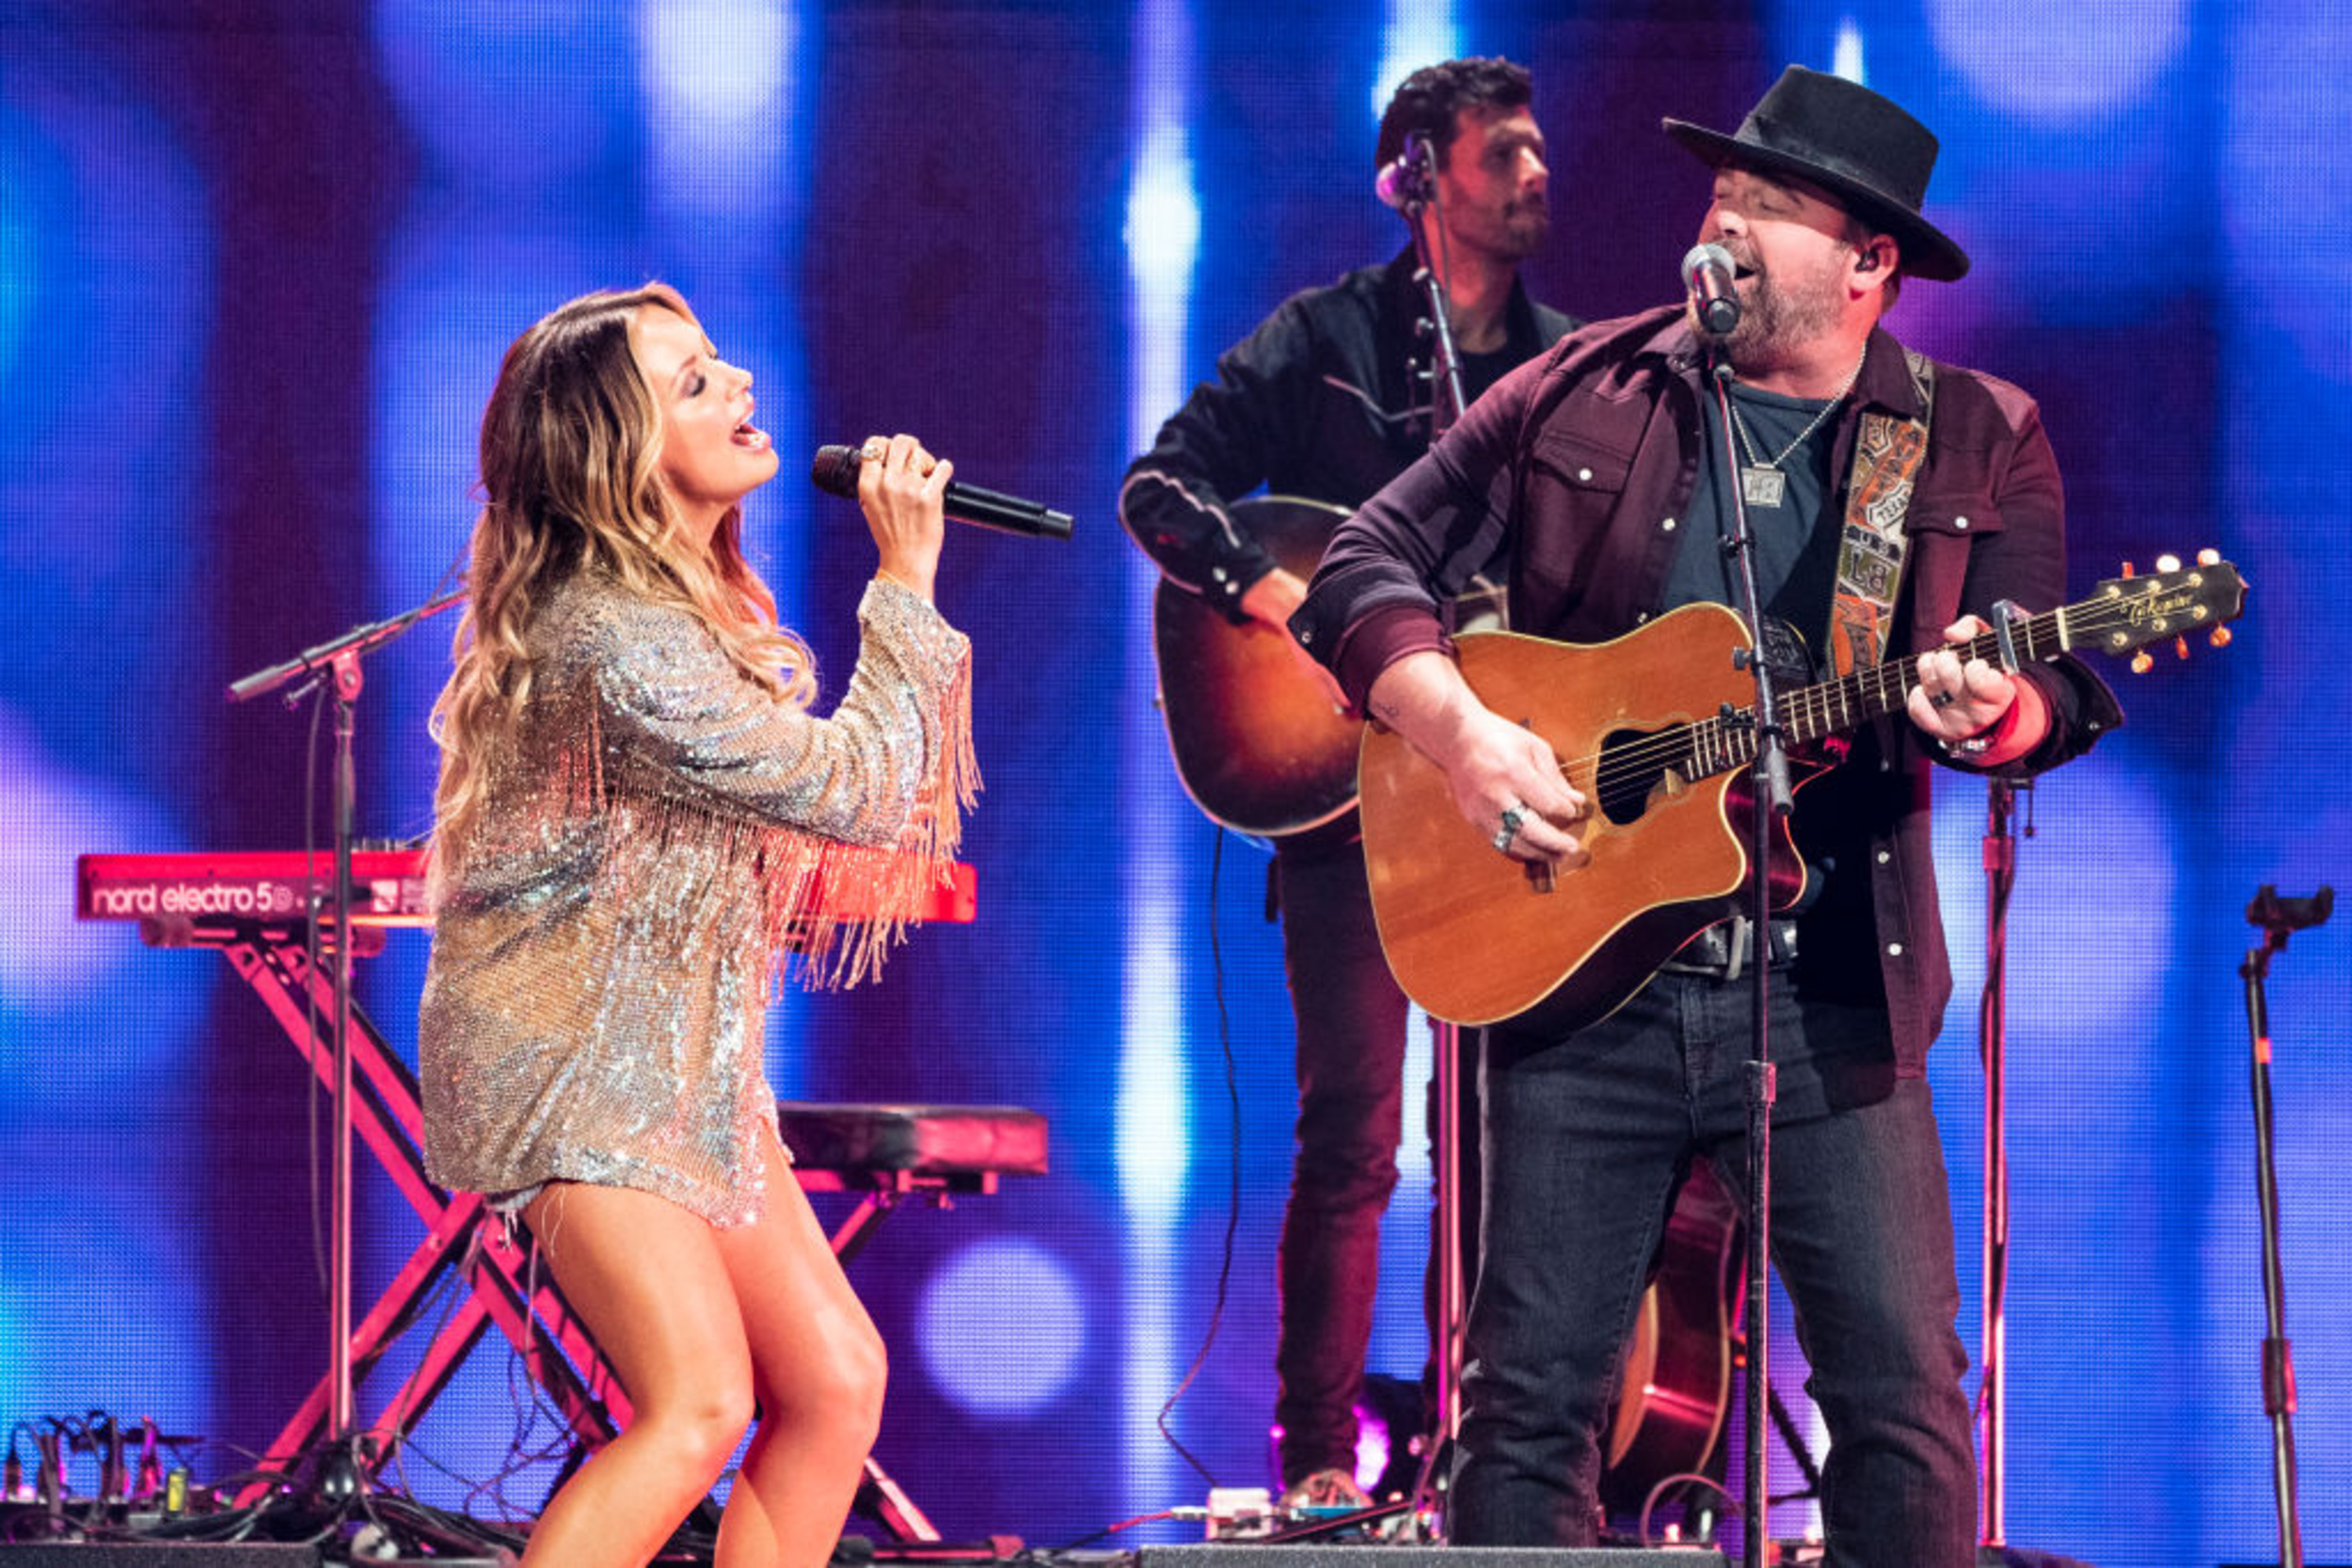 <p>This 2019 collab between Carly Pearce and Lee Brice features a co-write with Luke Combs, who penned the track with Pearce, Randy Montana, and Jonathan Singleton. And considering the amount of star power involved in this track, it's not surprising that it shot to #1. </p><p><a href='https://www.msn.com/en-us/community/channel/vid-cj9pqbr0vn9in2b6ddcd8sfgpfq6x6utp44fssrv6mc2gtybw0us'>Did you enjoy this slideshow? Follow us on MSN to see more of our exclusive entertainment content.</a></p>